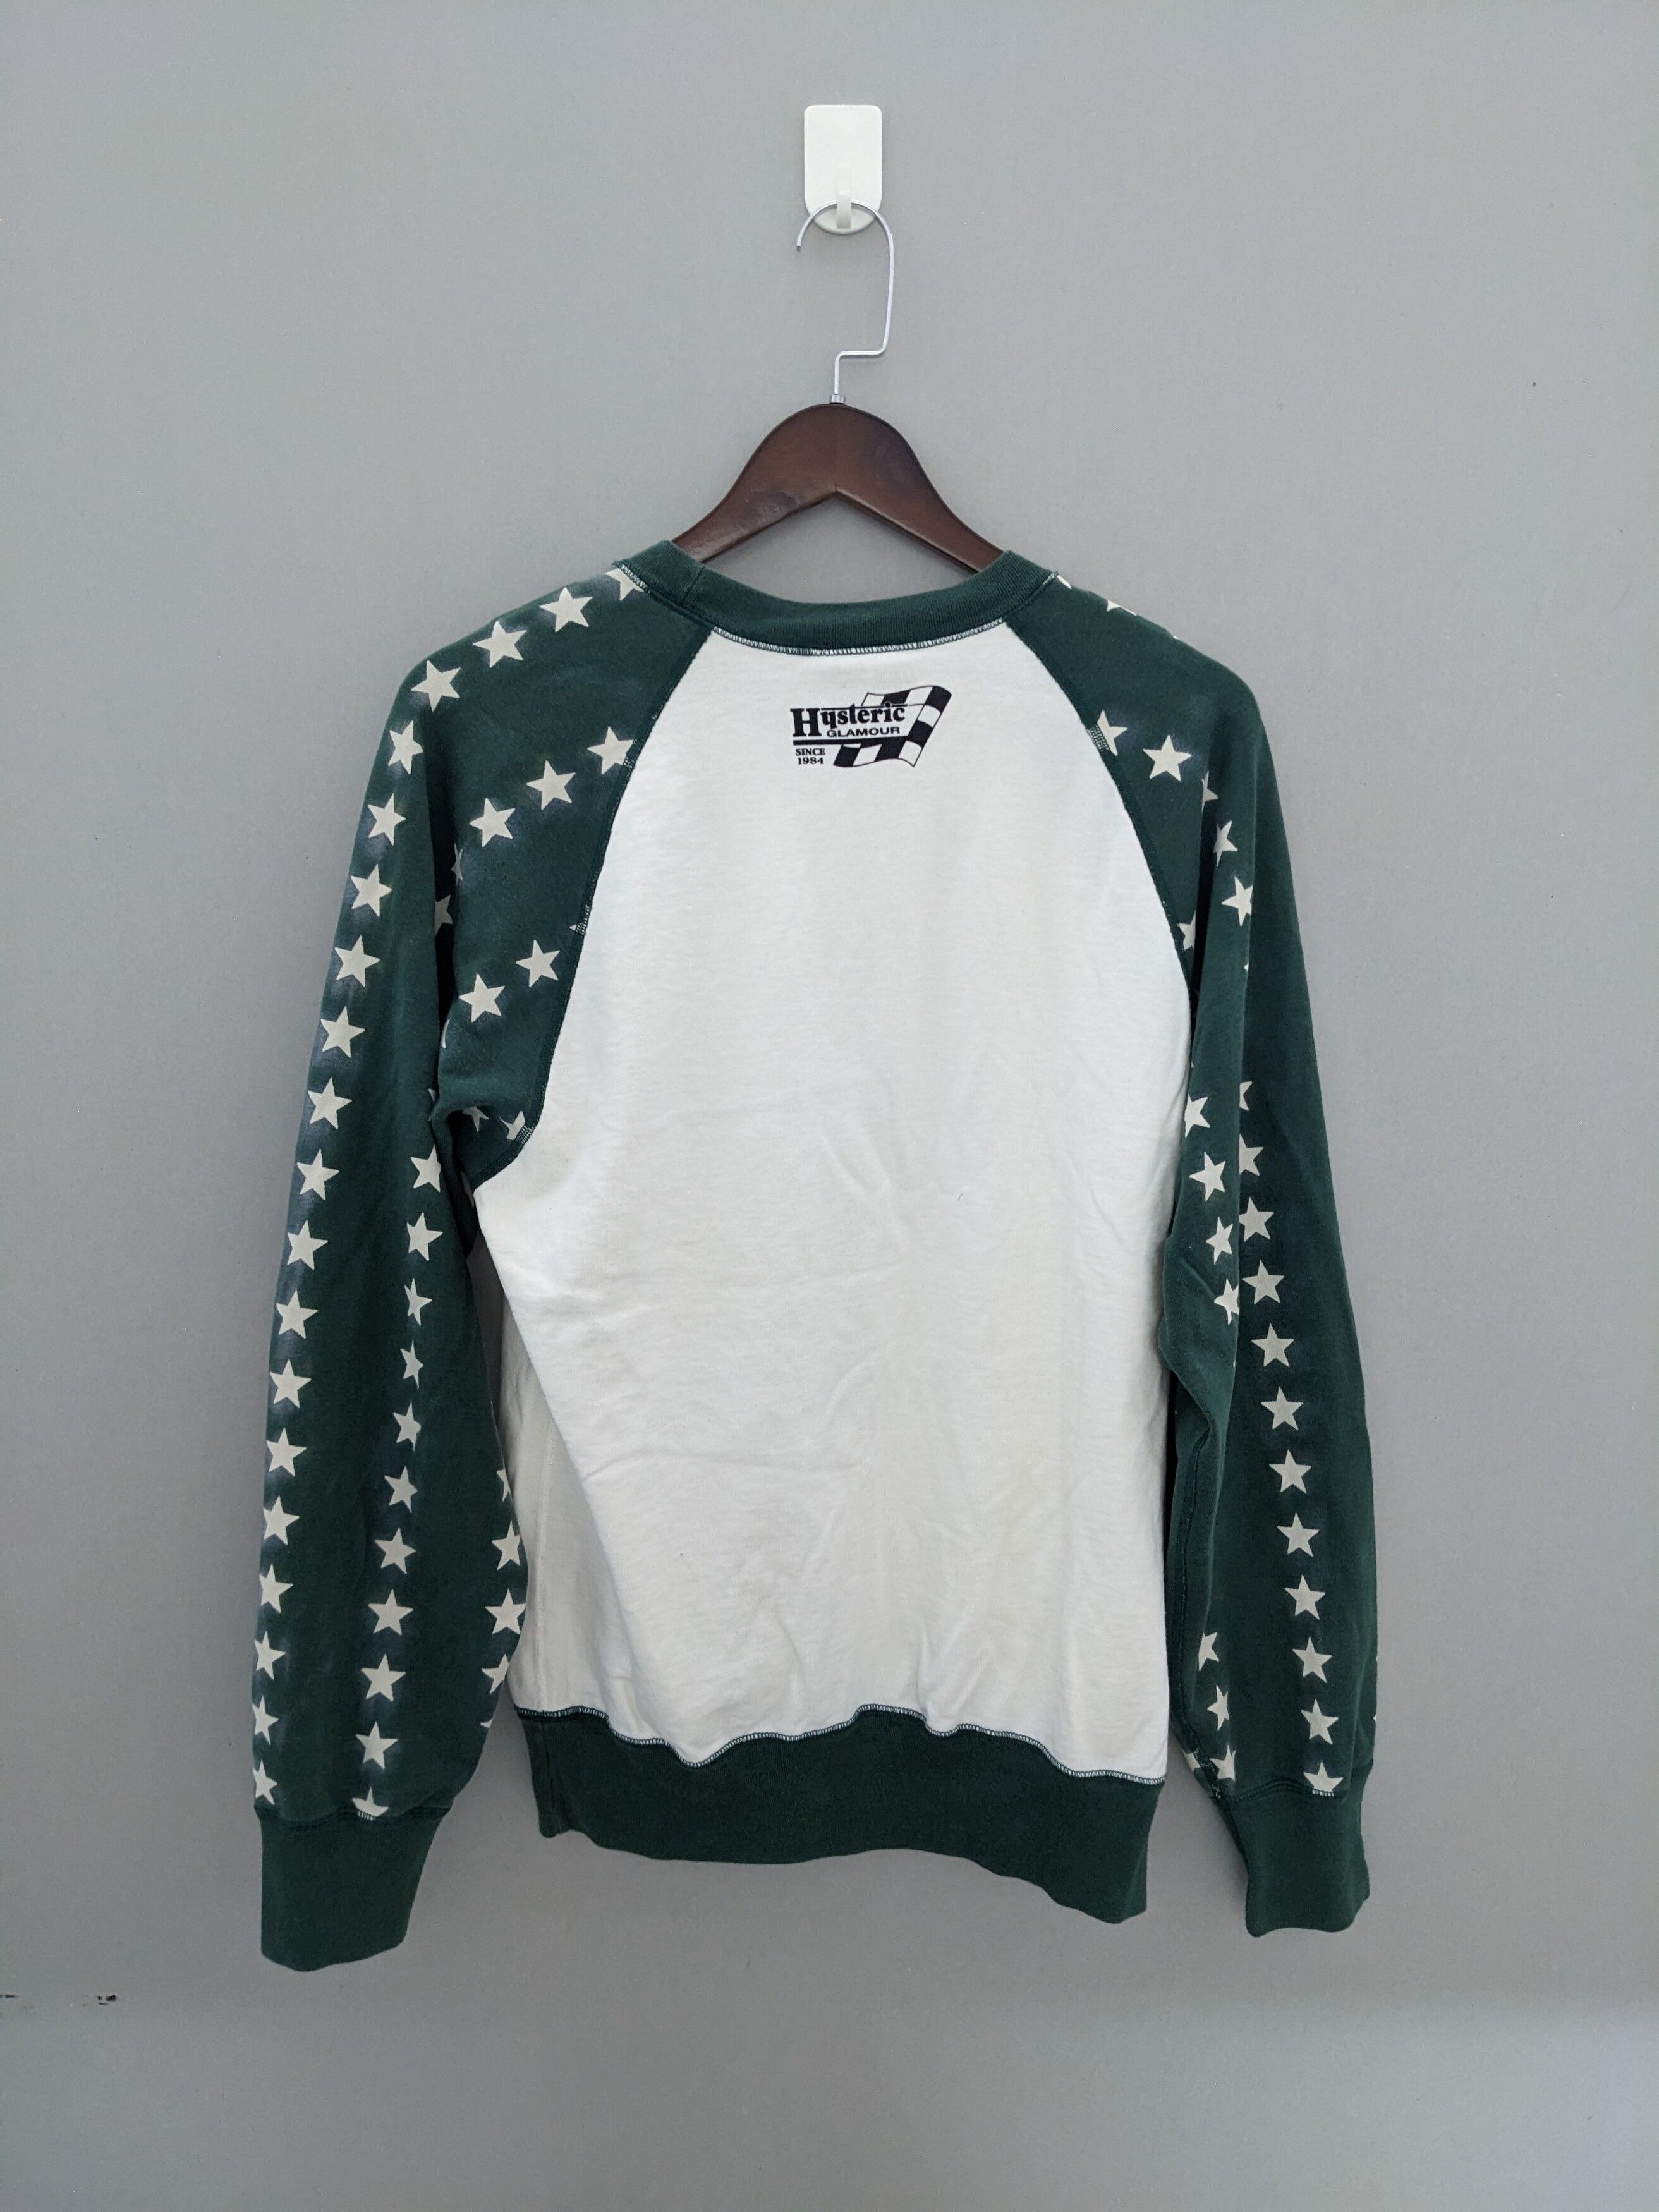 Hysteric Glamour Spellout White Green Stars Sweatshirt - 2